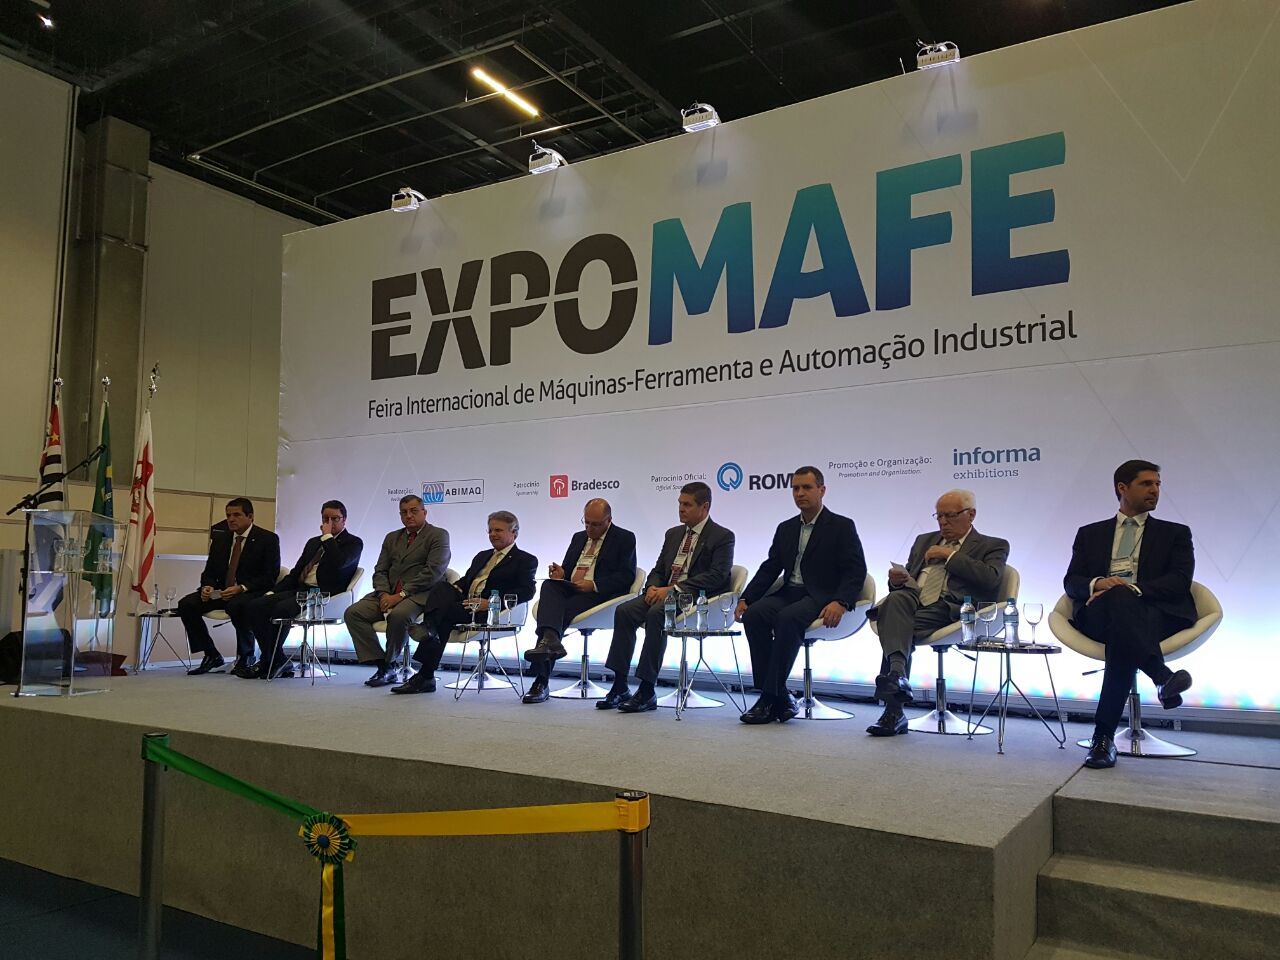 EXPOMAFE 2019 